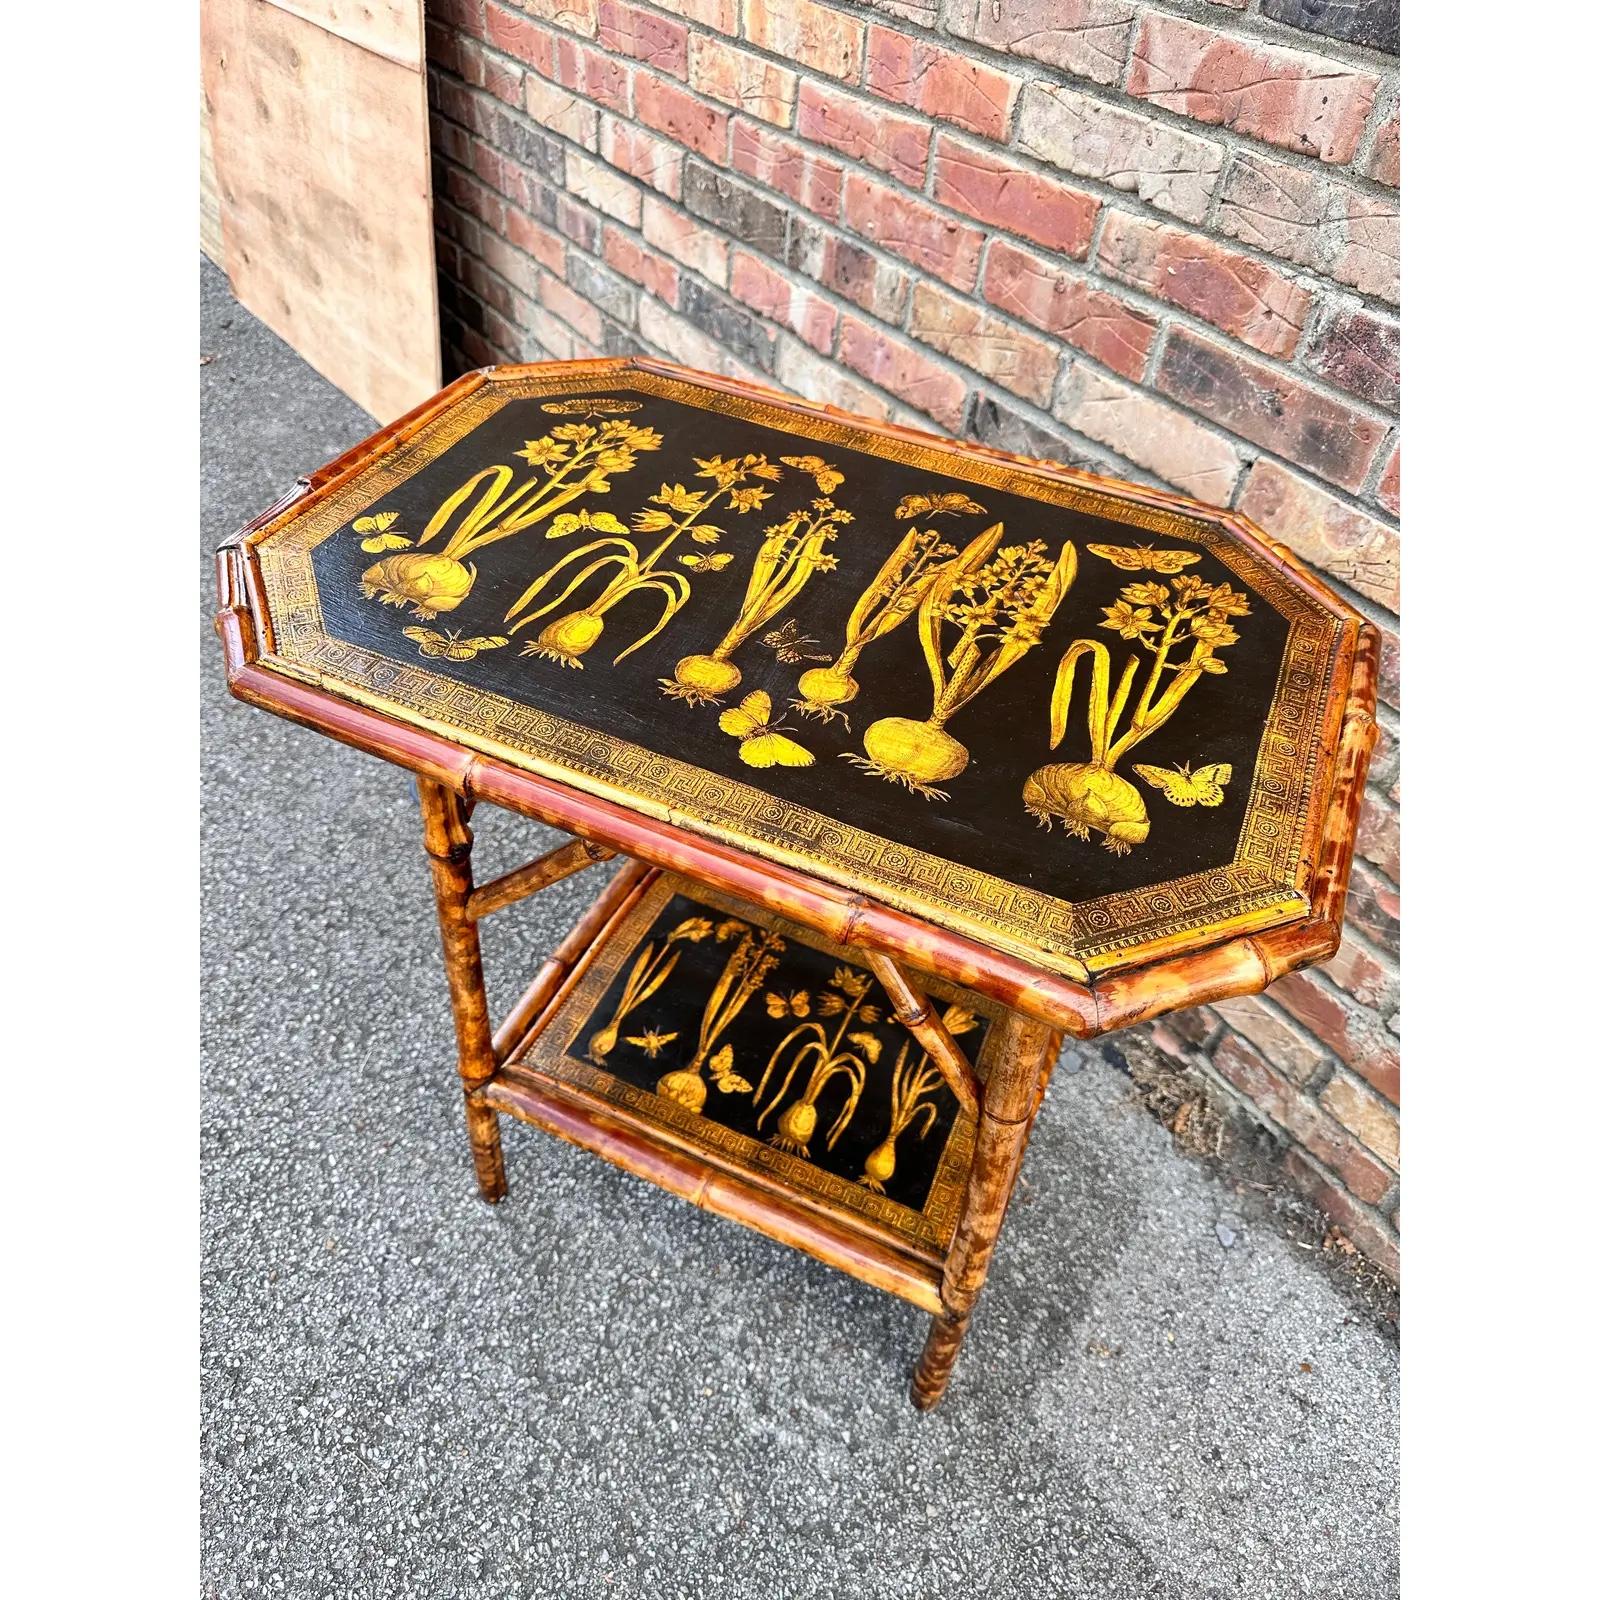 This is a beautiful antique English bamboo table. It’s been beautifully decapodged with antique botanical prints. The hello golden rod color and the black looks so amazing together. 
